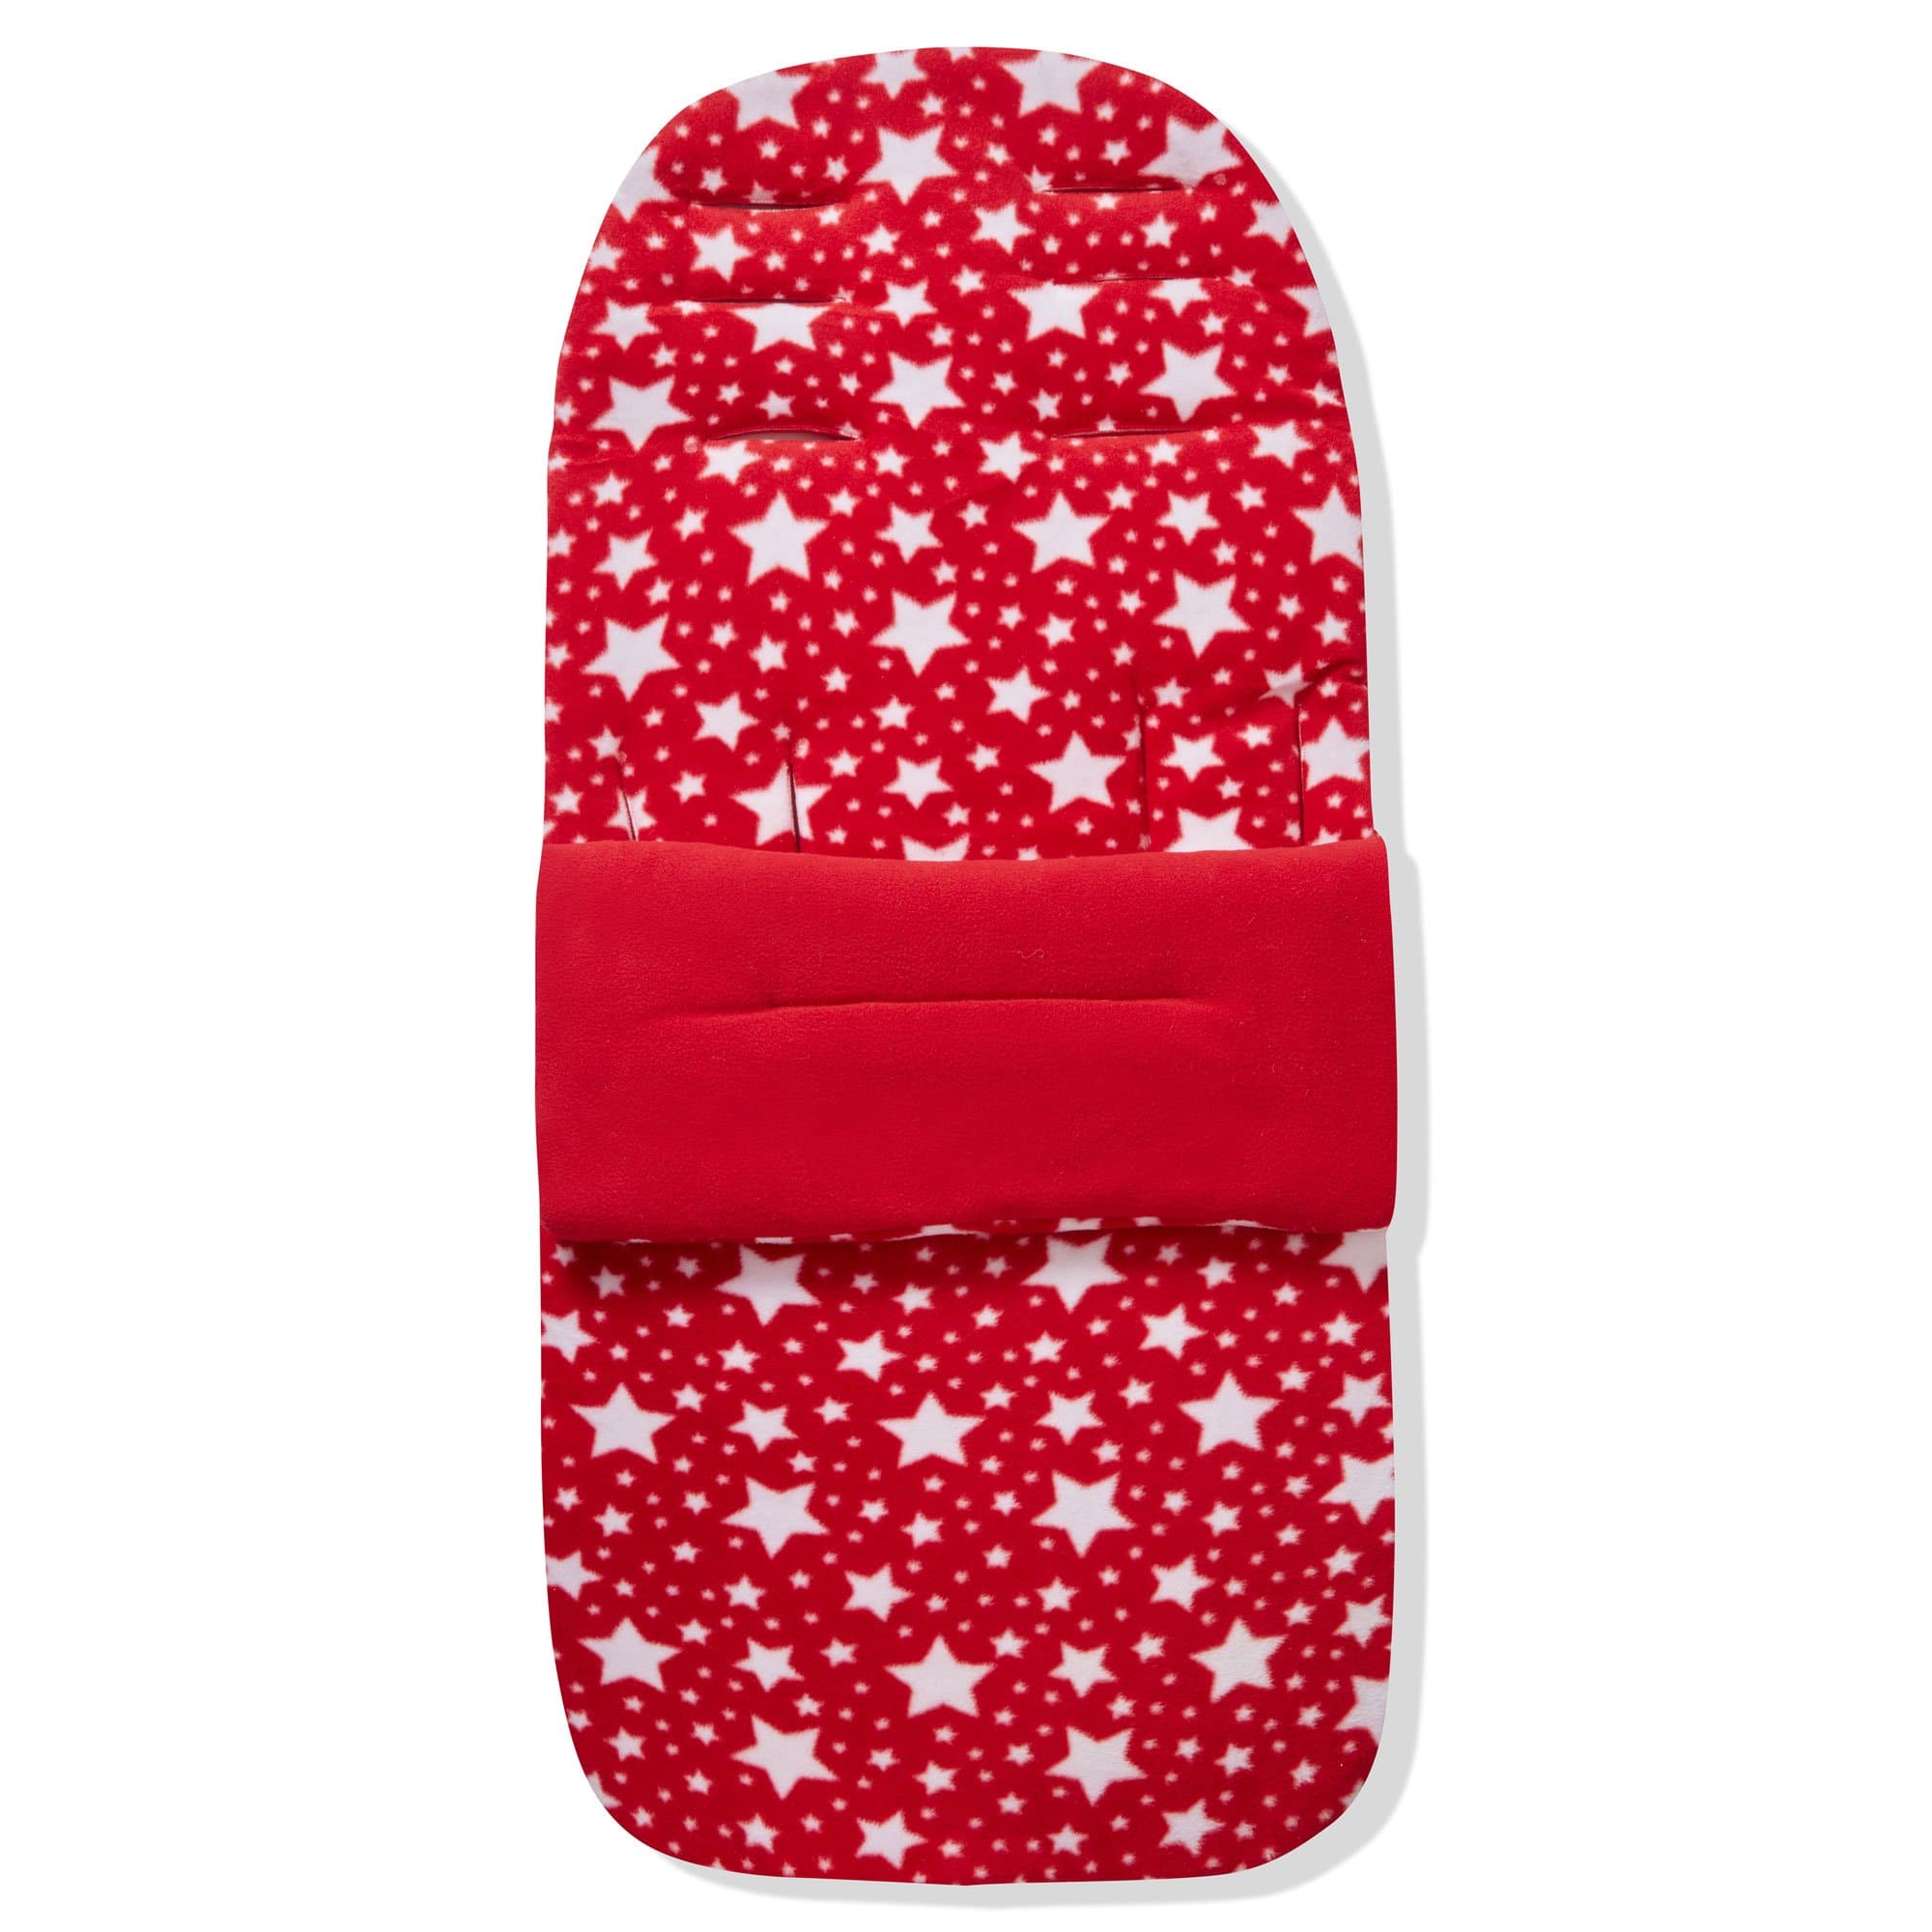 Fleece Footmuff / Cosy Toes Compatible with Red Kite - Red Star / Fits All Models | For Your Little One